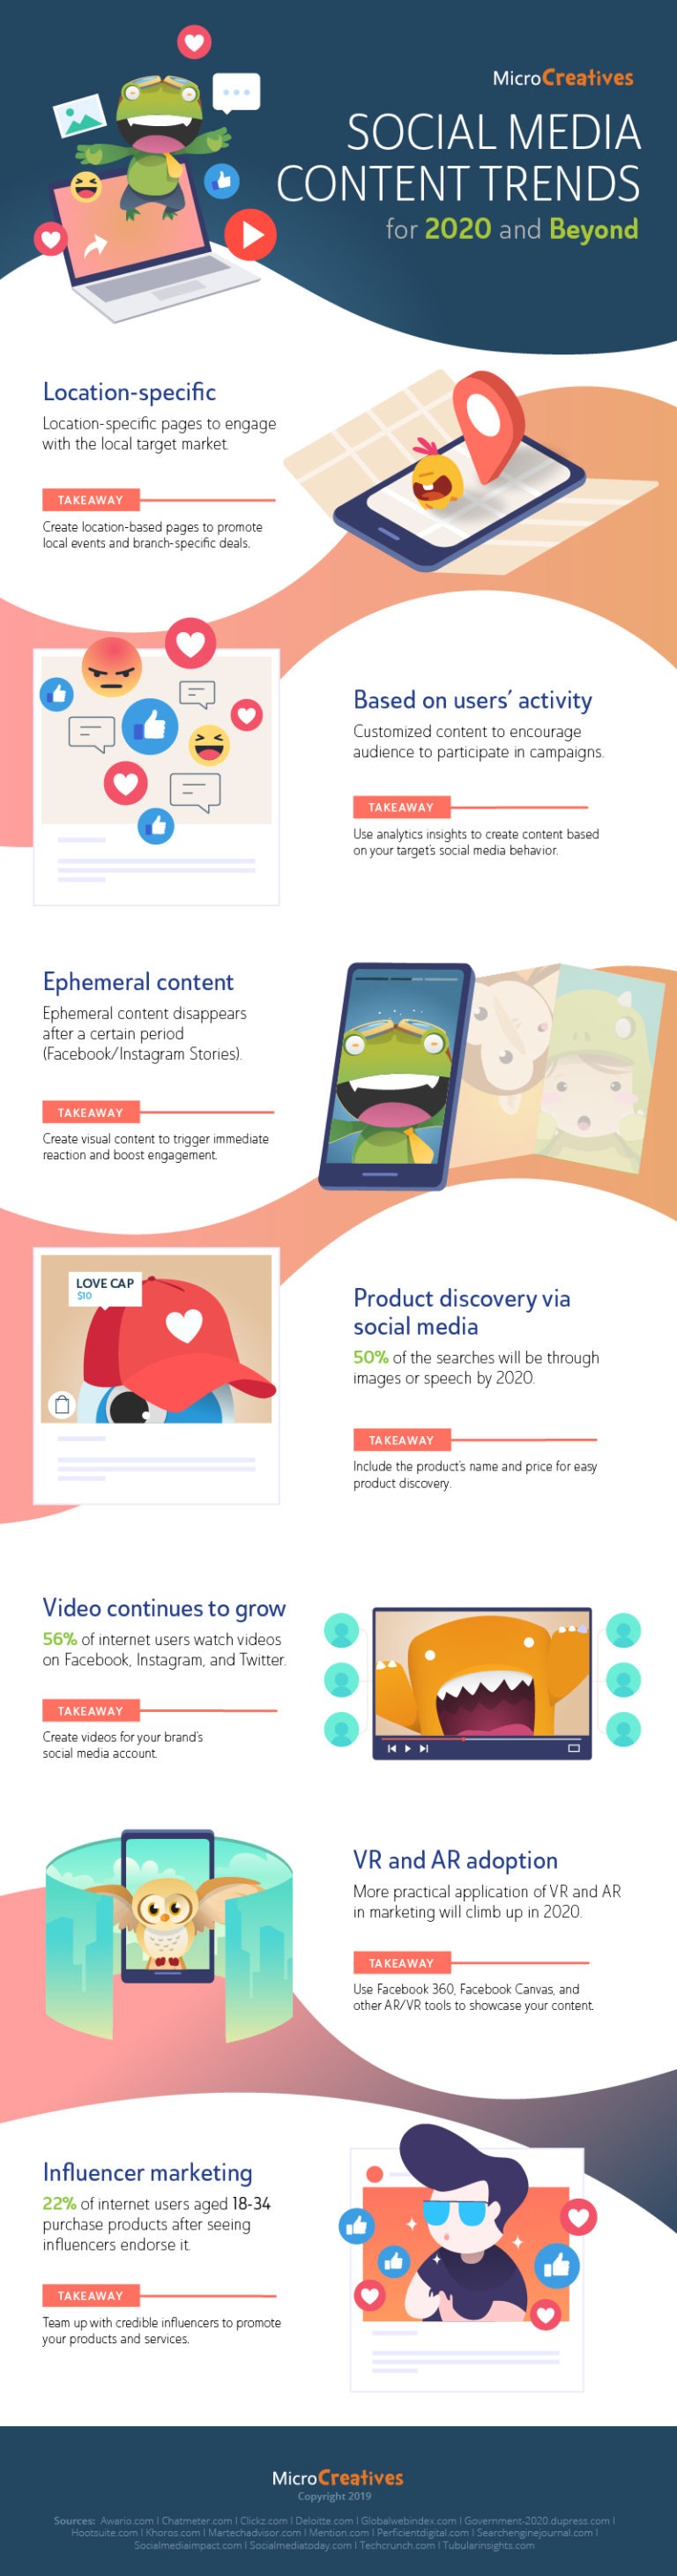 Infographic Seven Social Media Content Trends for 2020 and Beyond